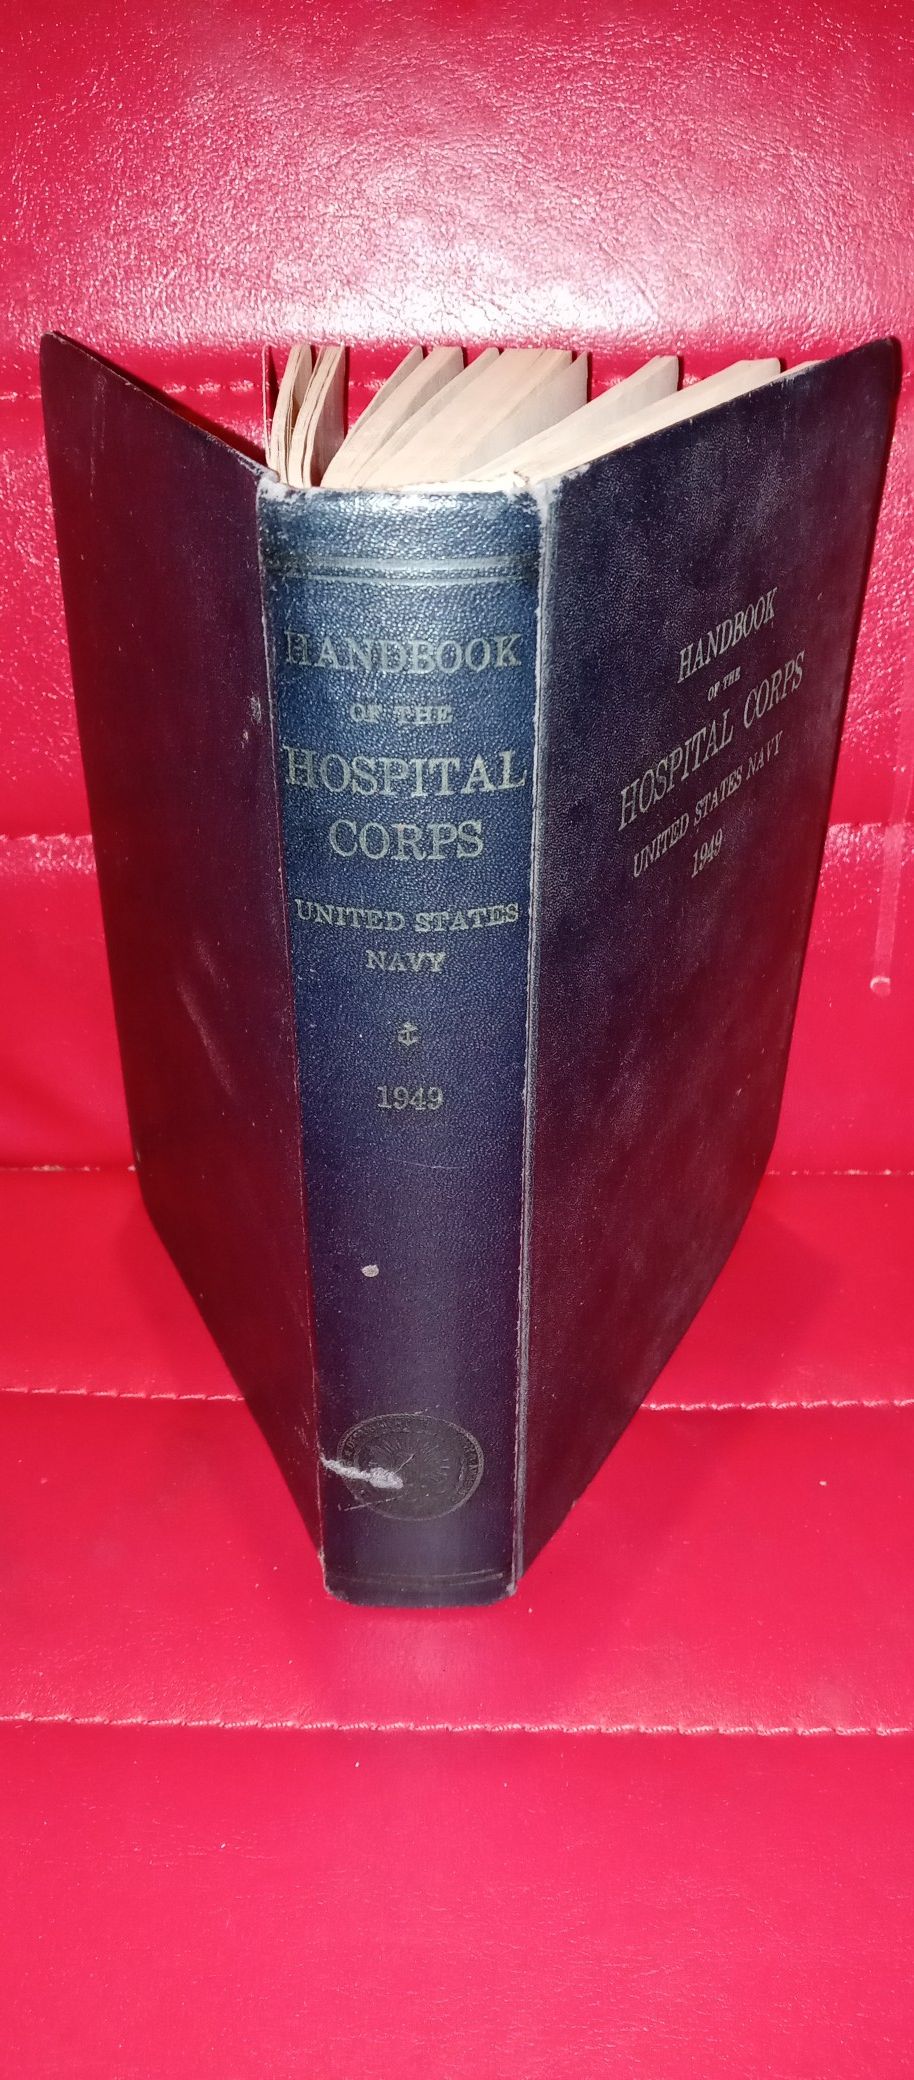 Handbook of the Hospital Corps United States Navy 1949